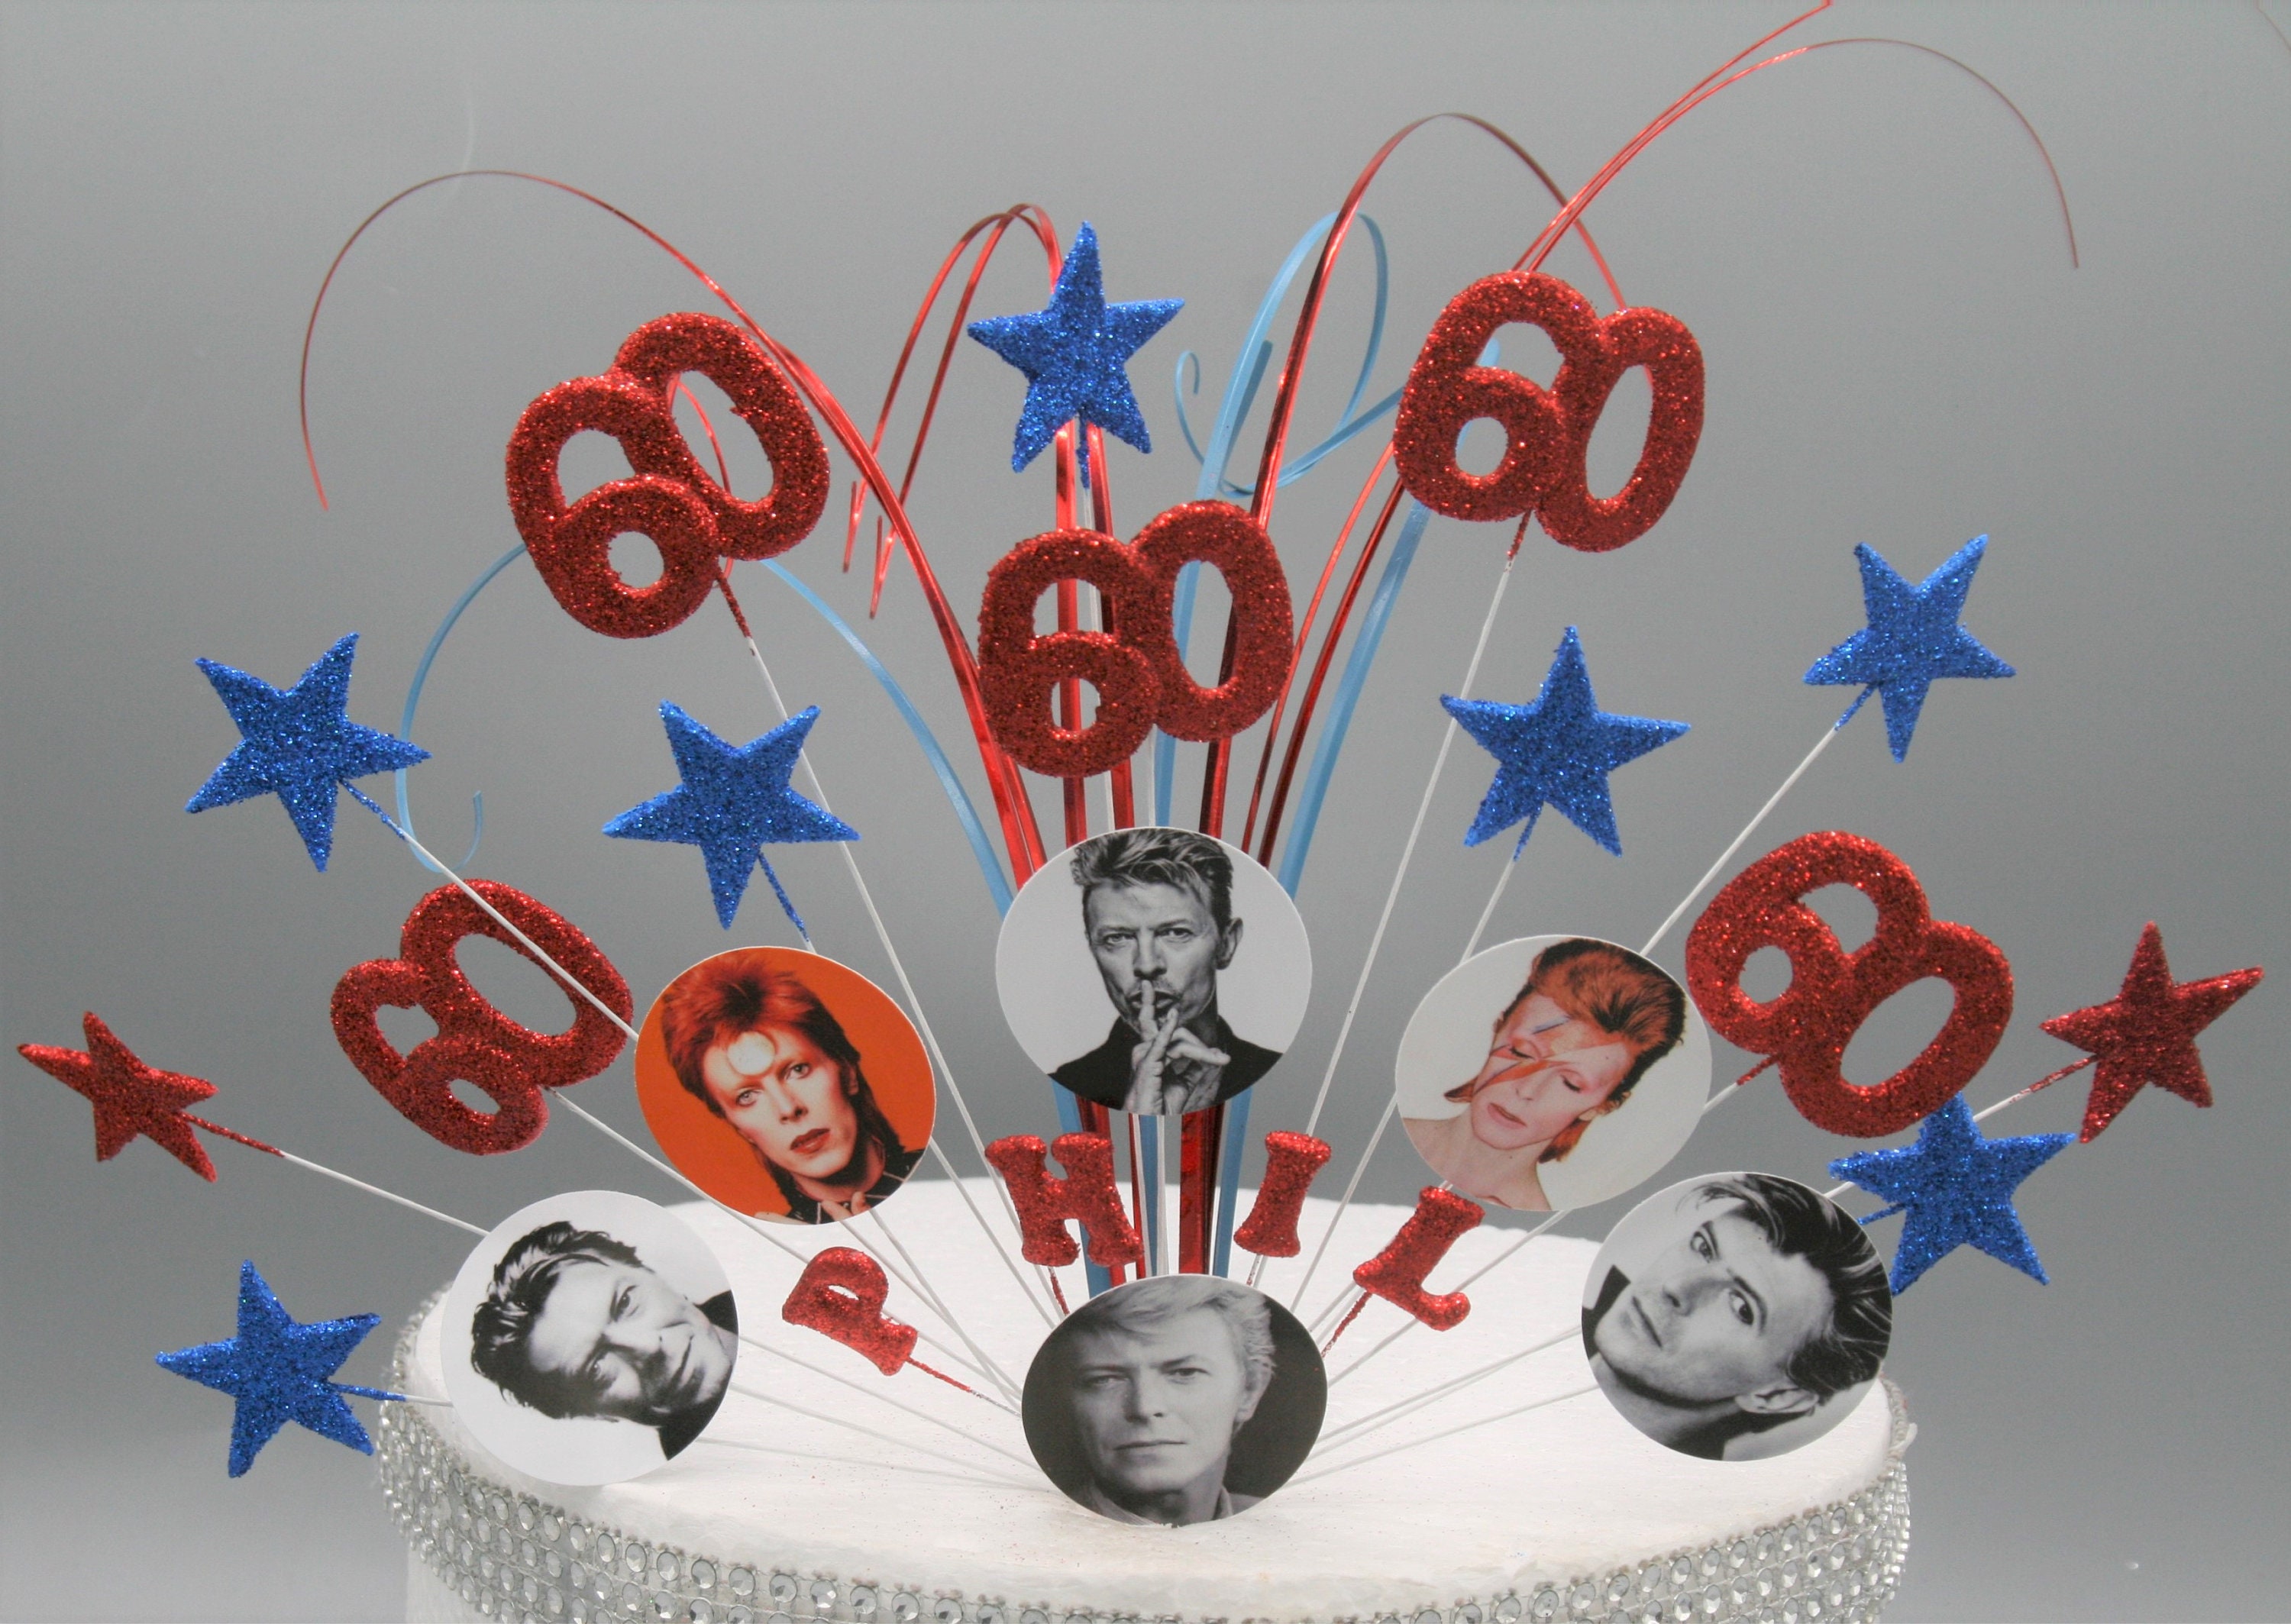 David Bowie Any Colour Glitter Cake Topper Spray Cake Decoration Birthday 18th 21st 30th 40th 50th 60th 70th Stars on Wires 004